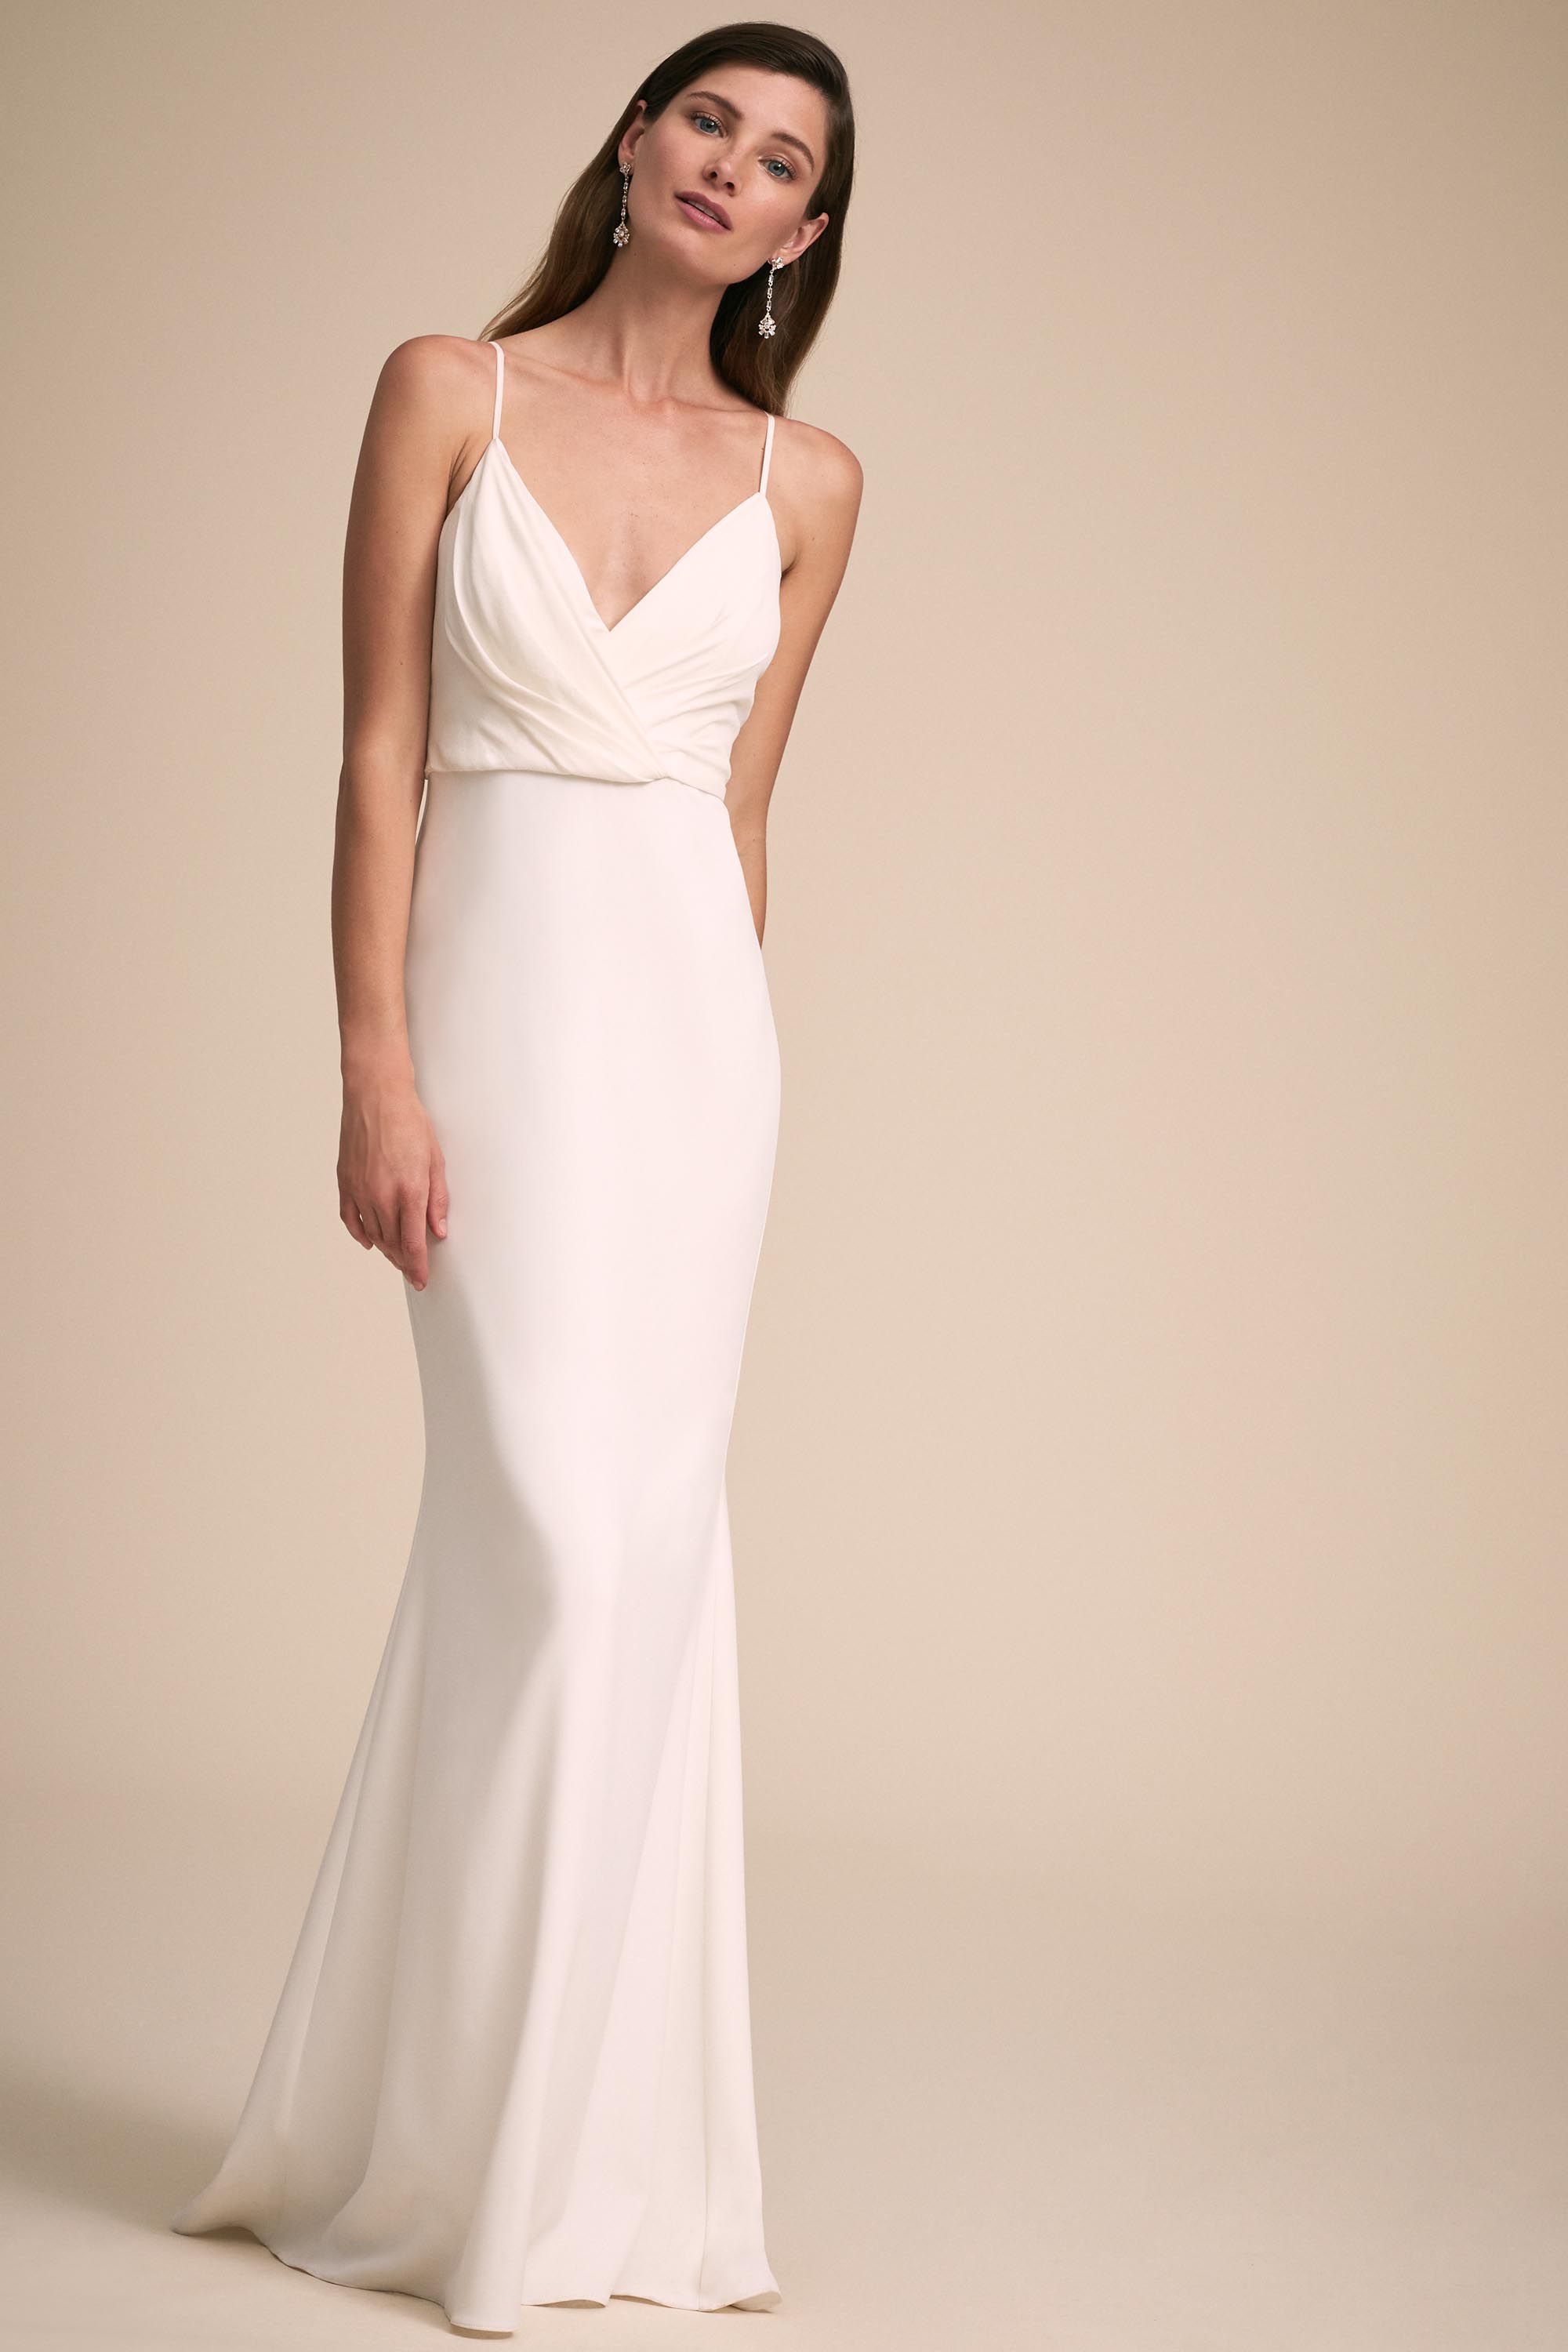 At Last Gown - BHLDN